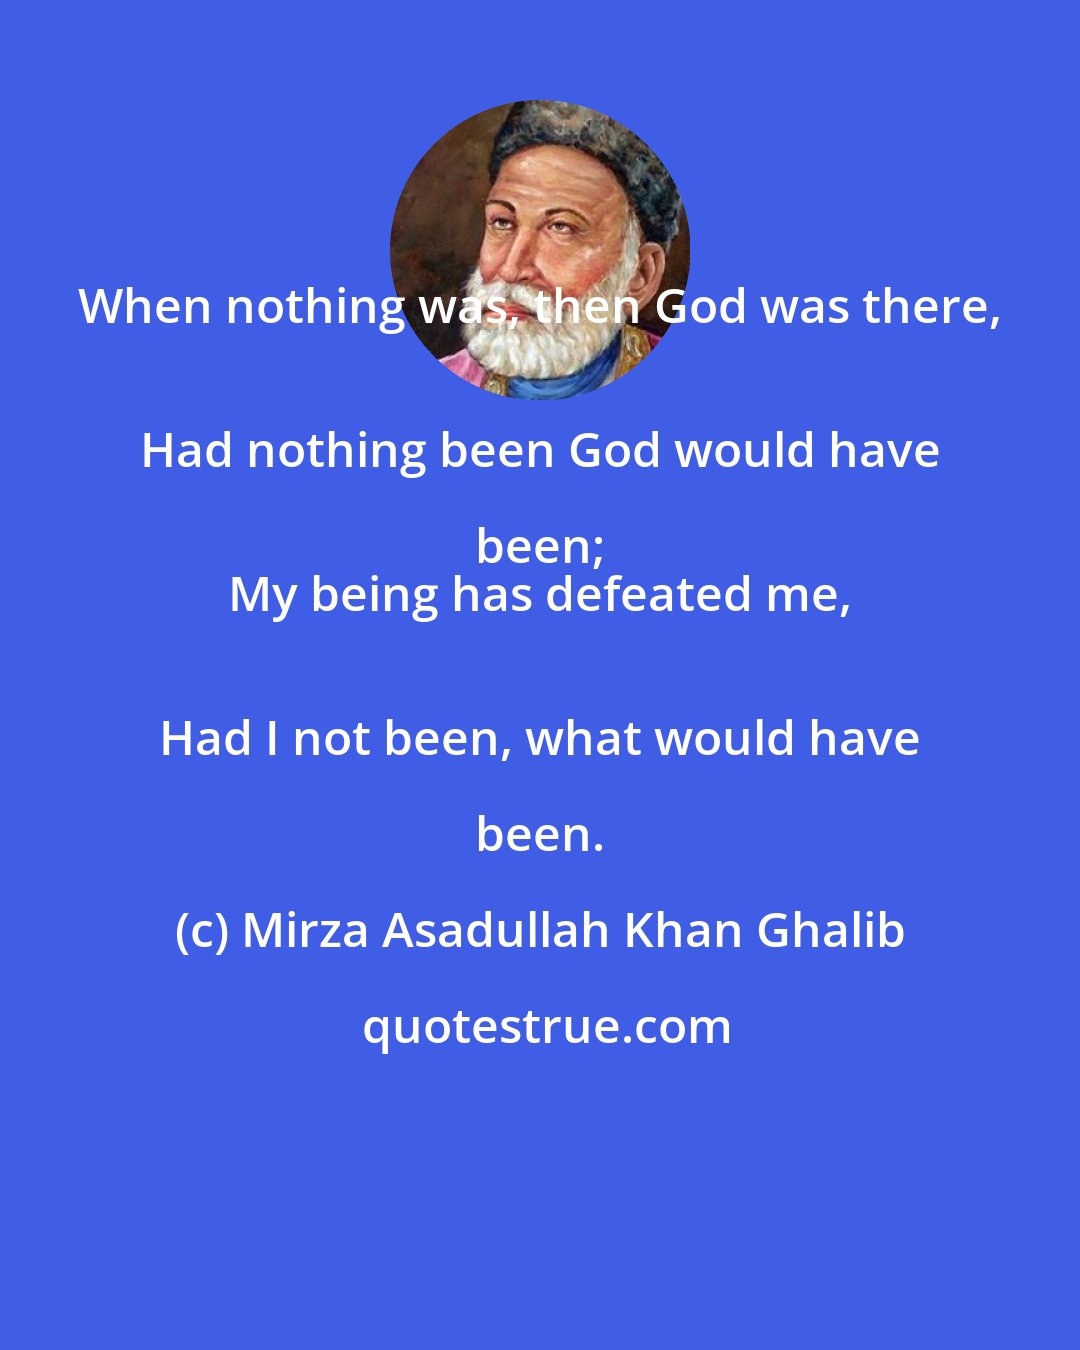 Mirza Asadullah Khan Ghalib: When nothing was, then God was there, 
 Had nothing been God would have been; 
 My being has defeated me, 
 Had I not been, what would have been.